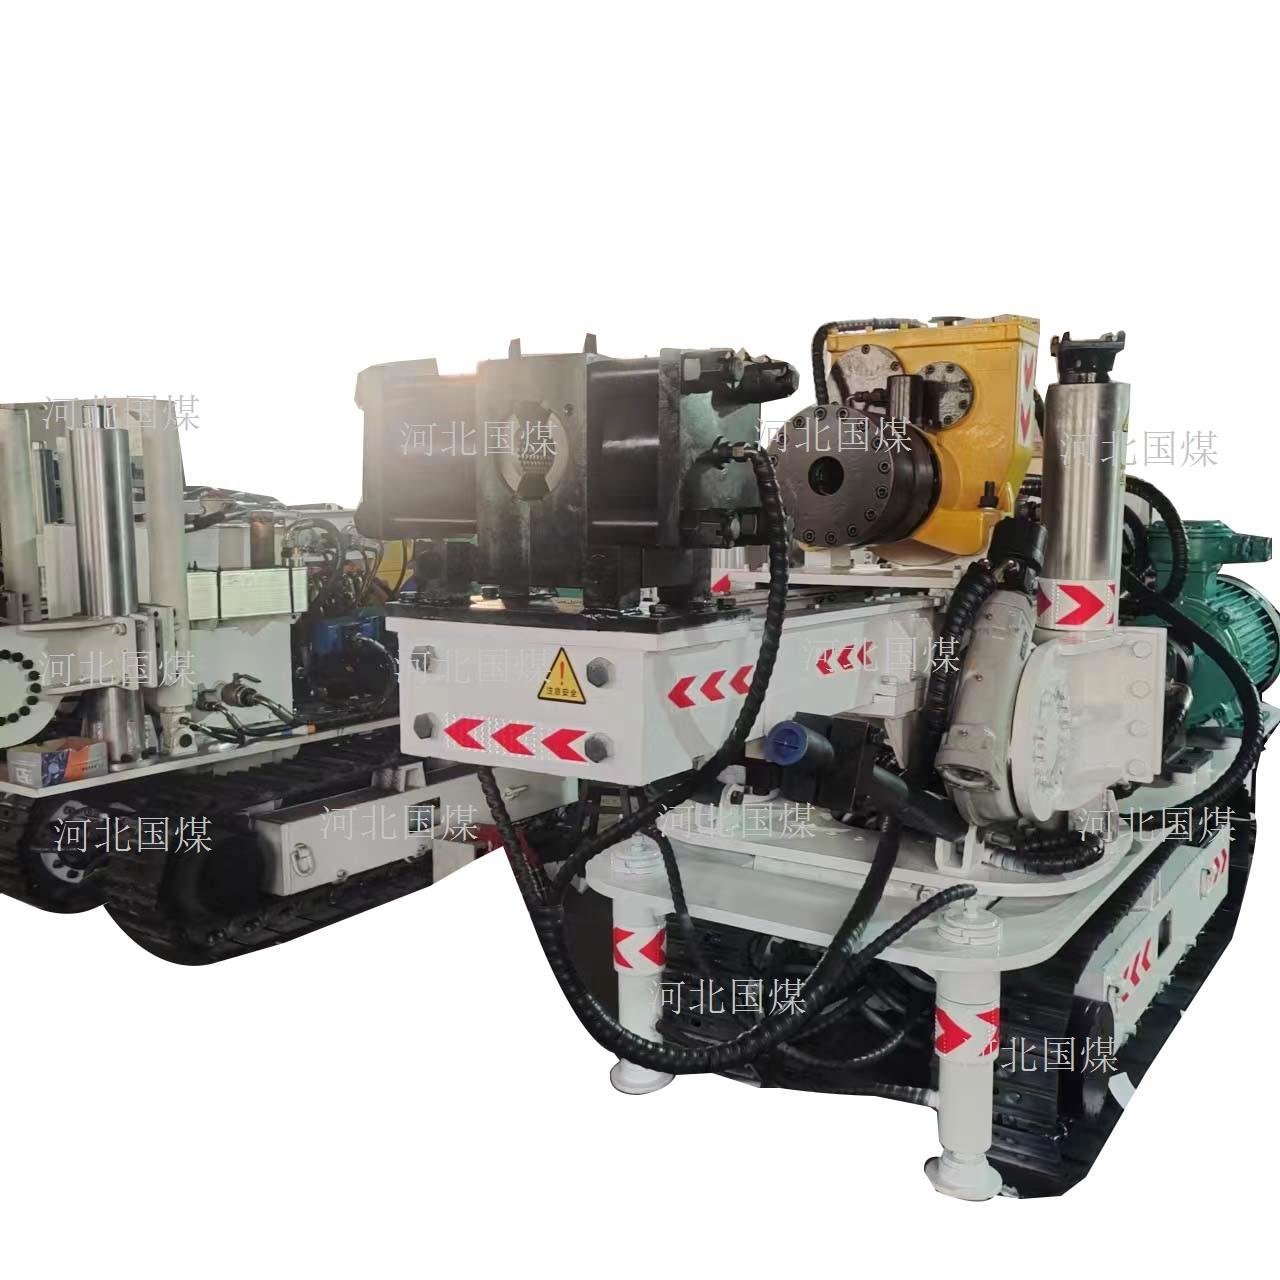 Crawler type full hydraulic tunnel drilling rig for coal mines, full directional